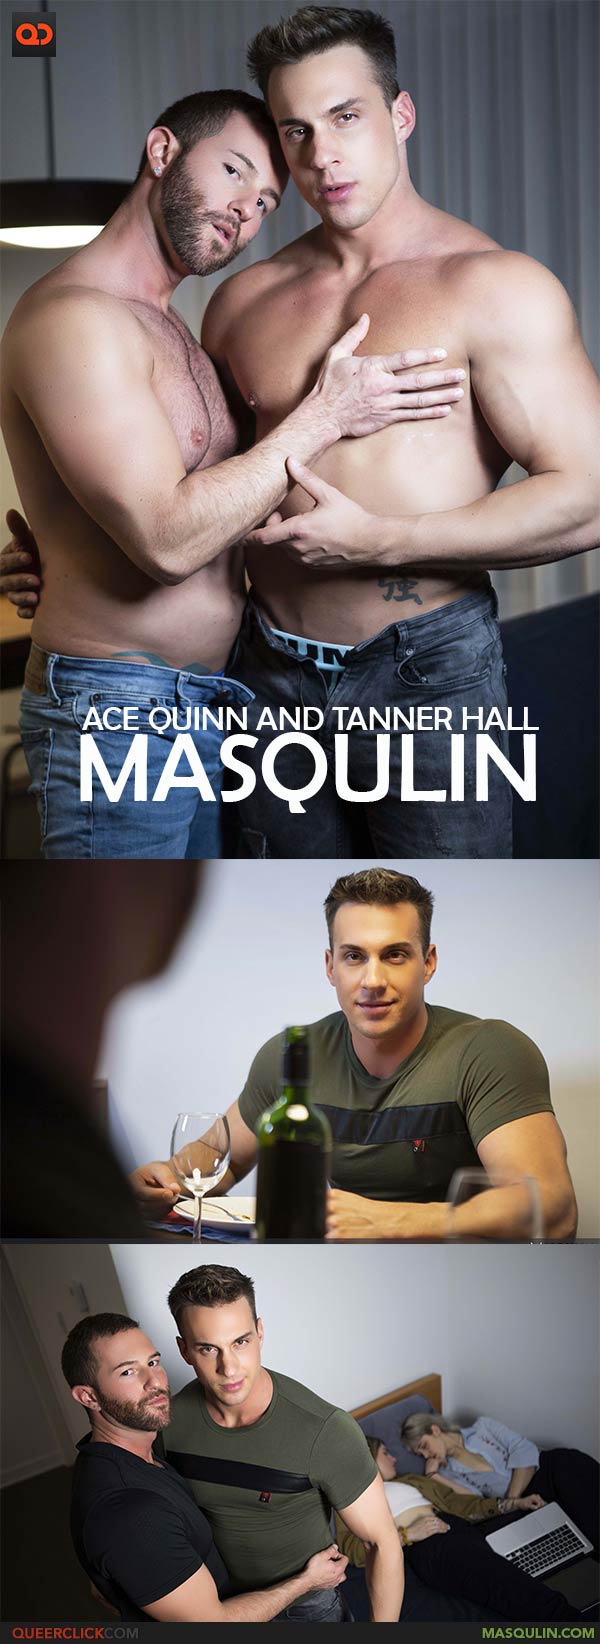 Masqulin: Ace Quinn and Tanner Hall